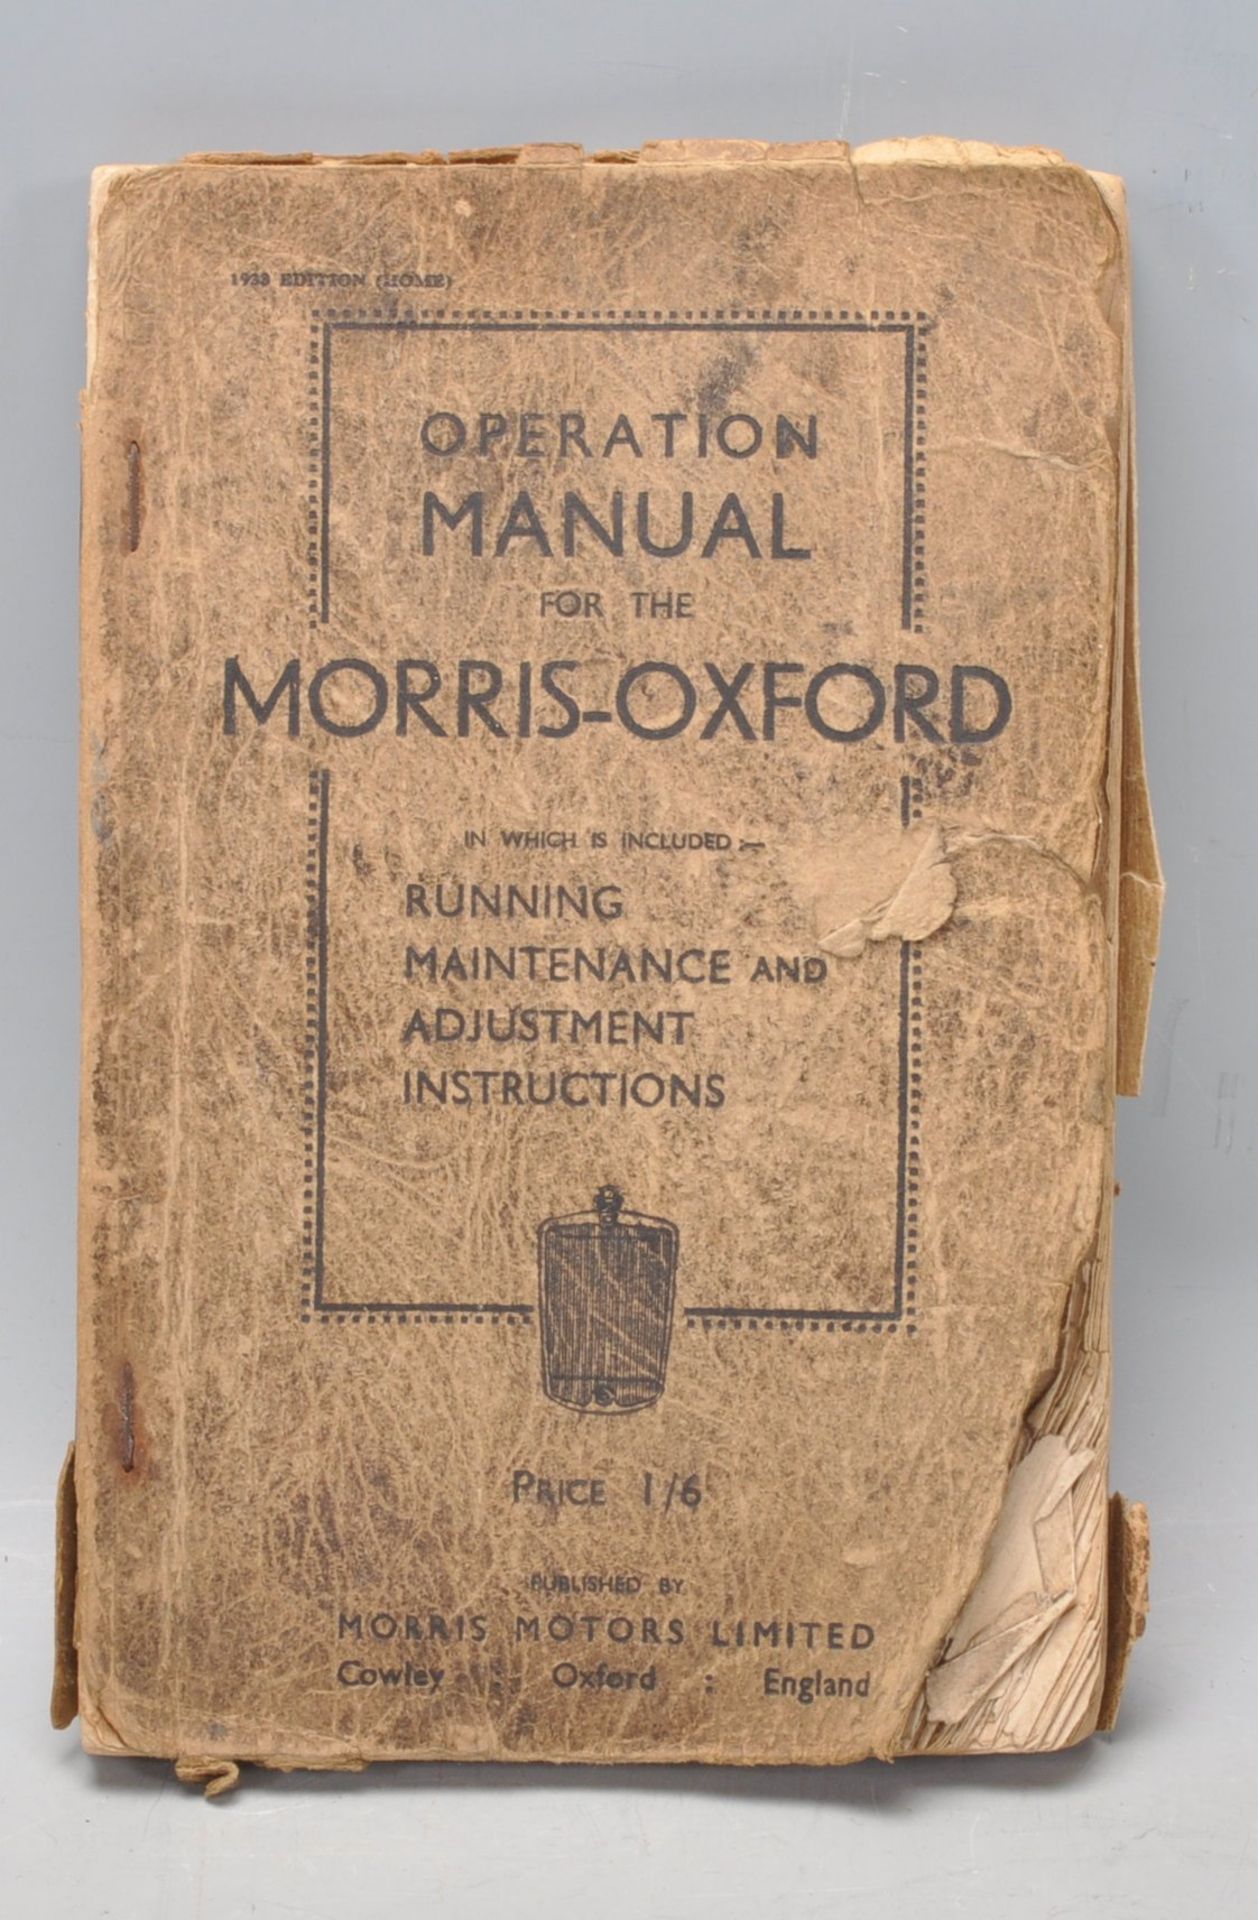 Motoring - A Operation Manual for a Morris-Oxford Six. 1933 edition.